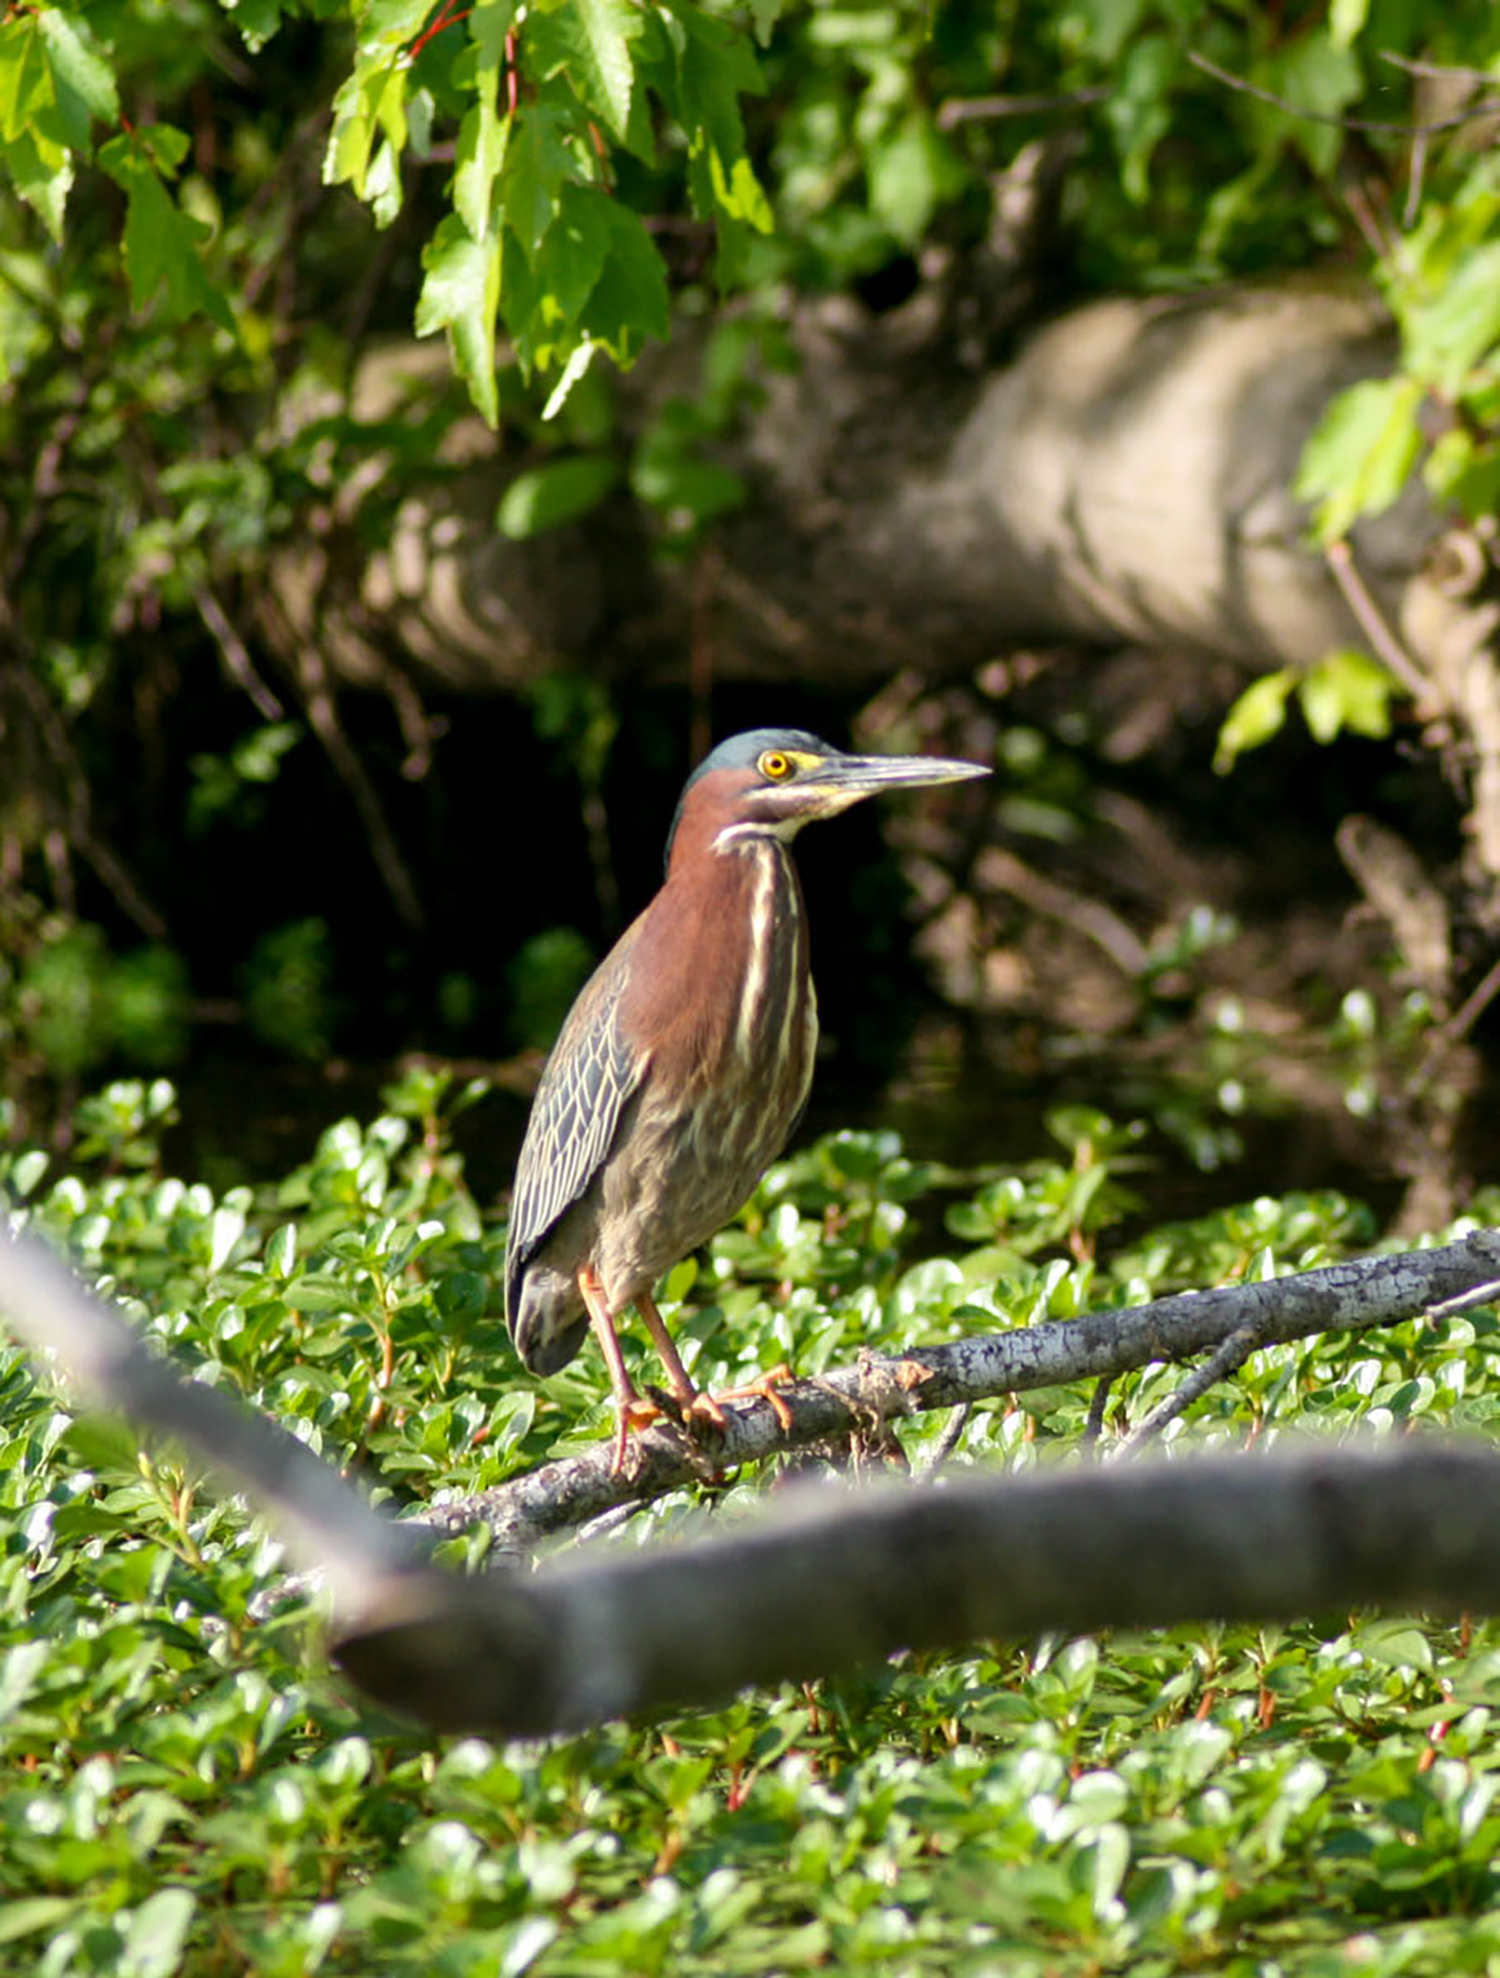 A green heron sits on a branch in the swamp.